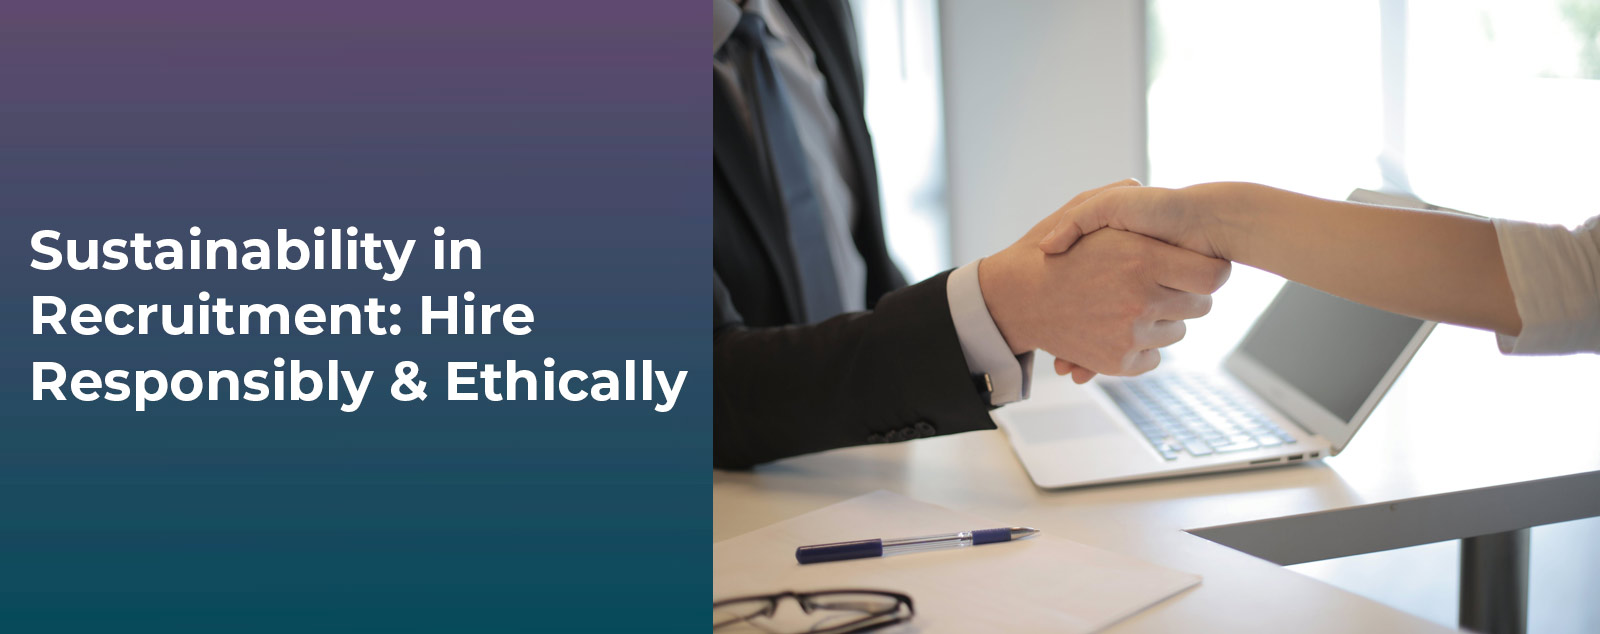 Sustainability in Recruitment: Hire Responsibly & Ethically